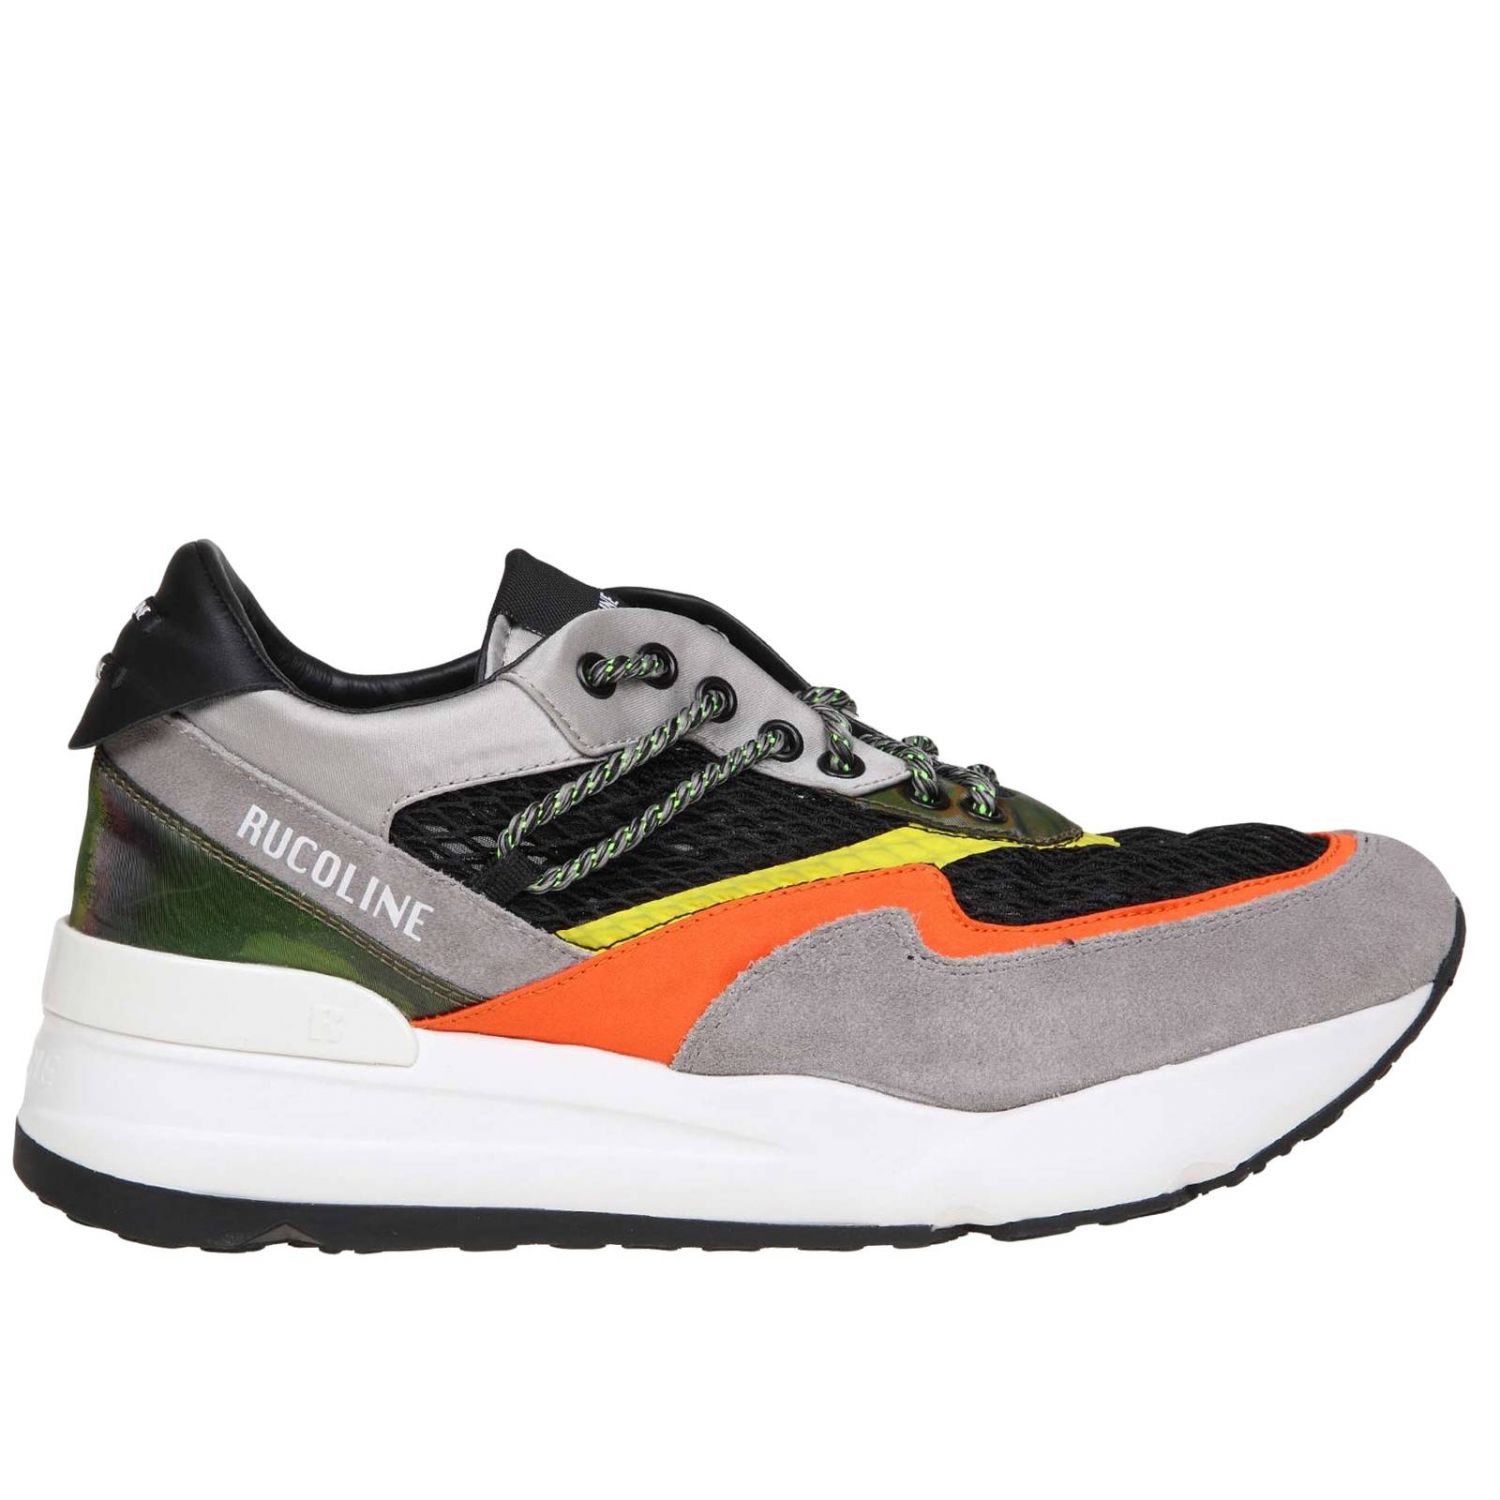 ruco line trainers